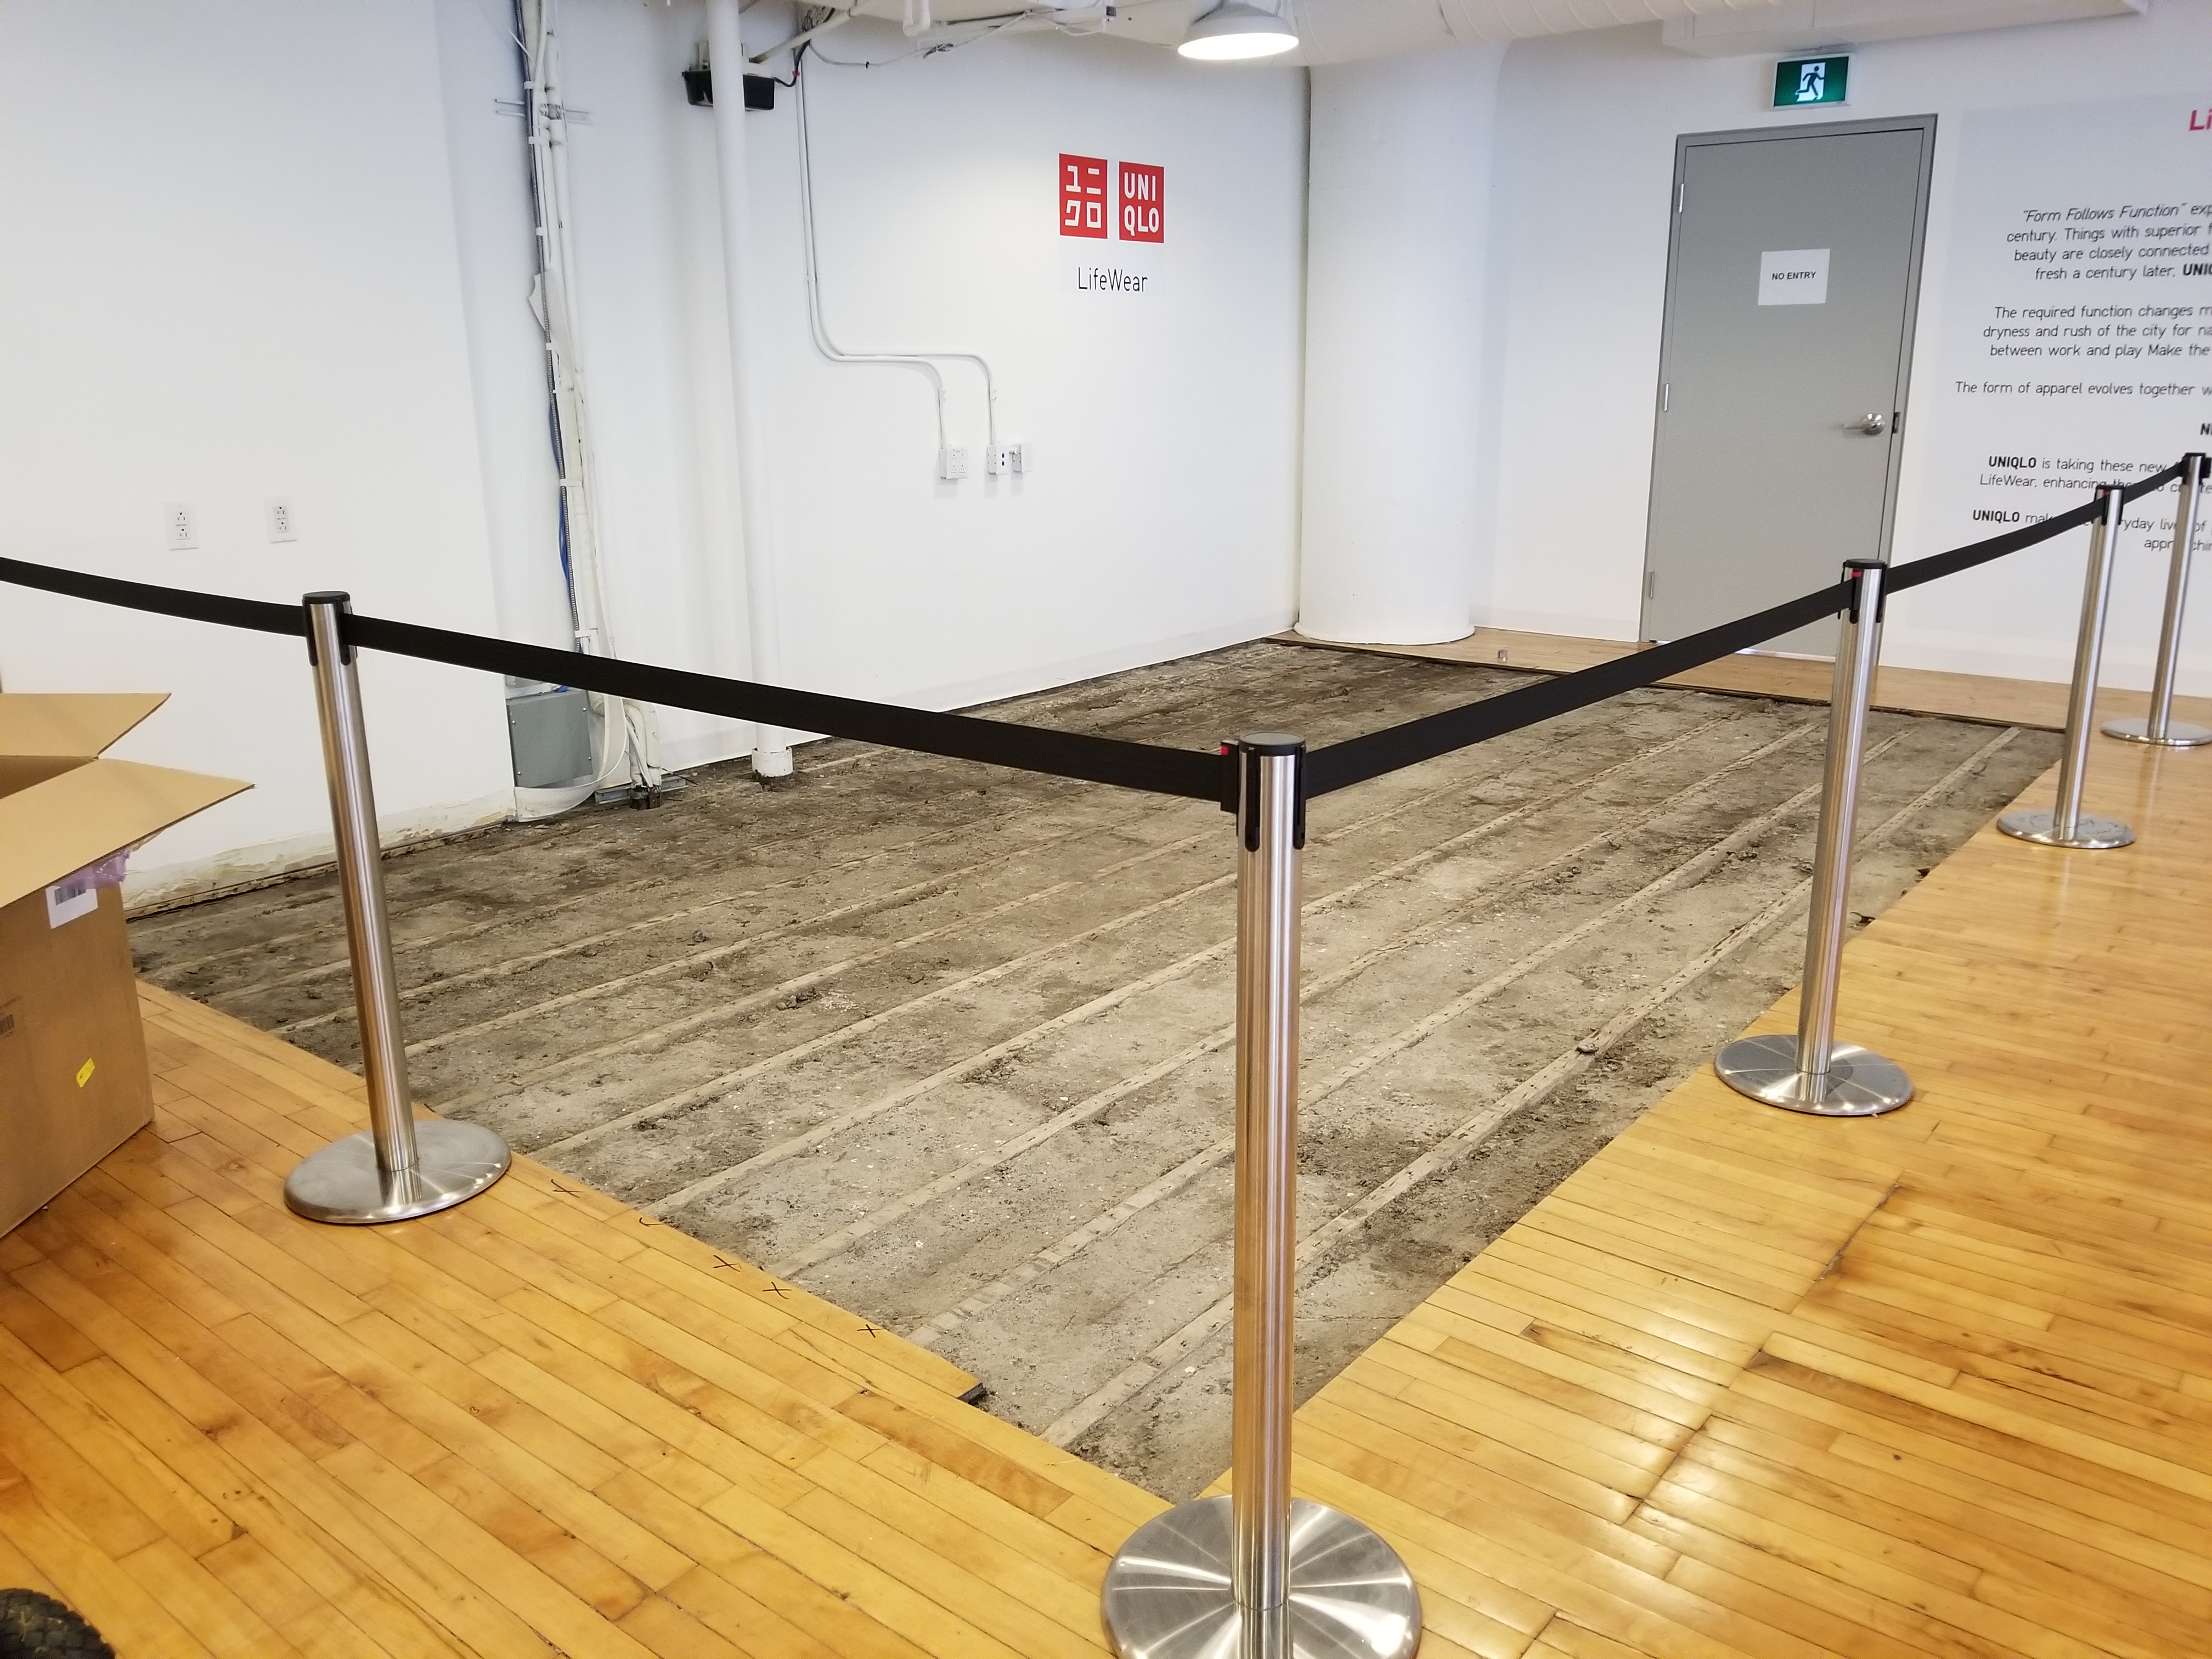 Chrome stanchions with black retractable belt seperating section of venue that is undergoing renovations